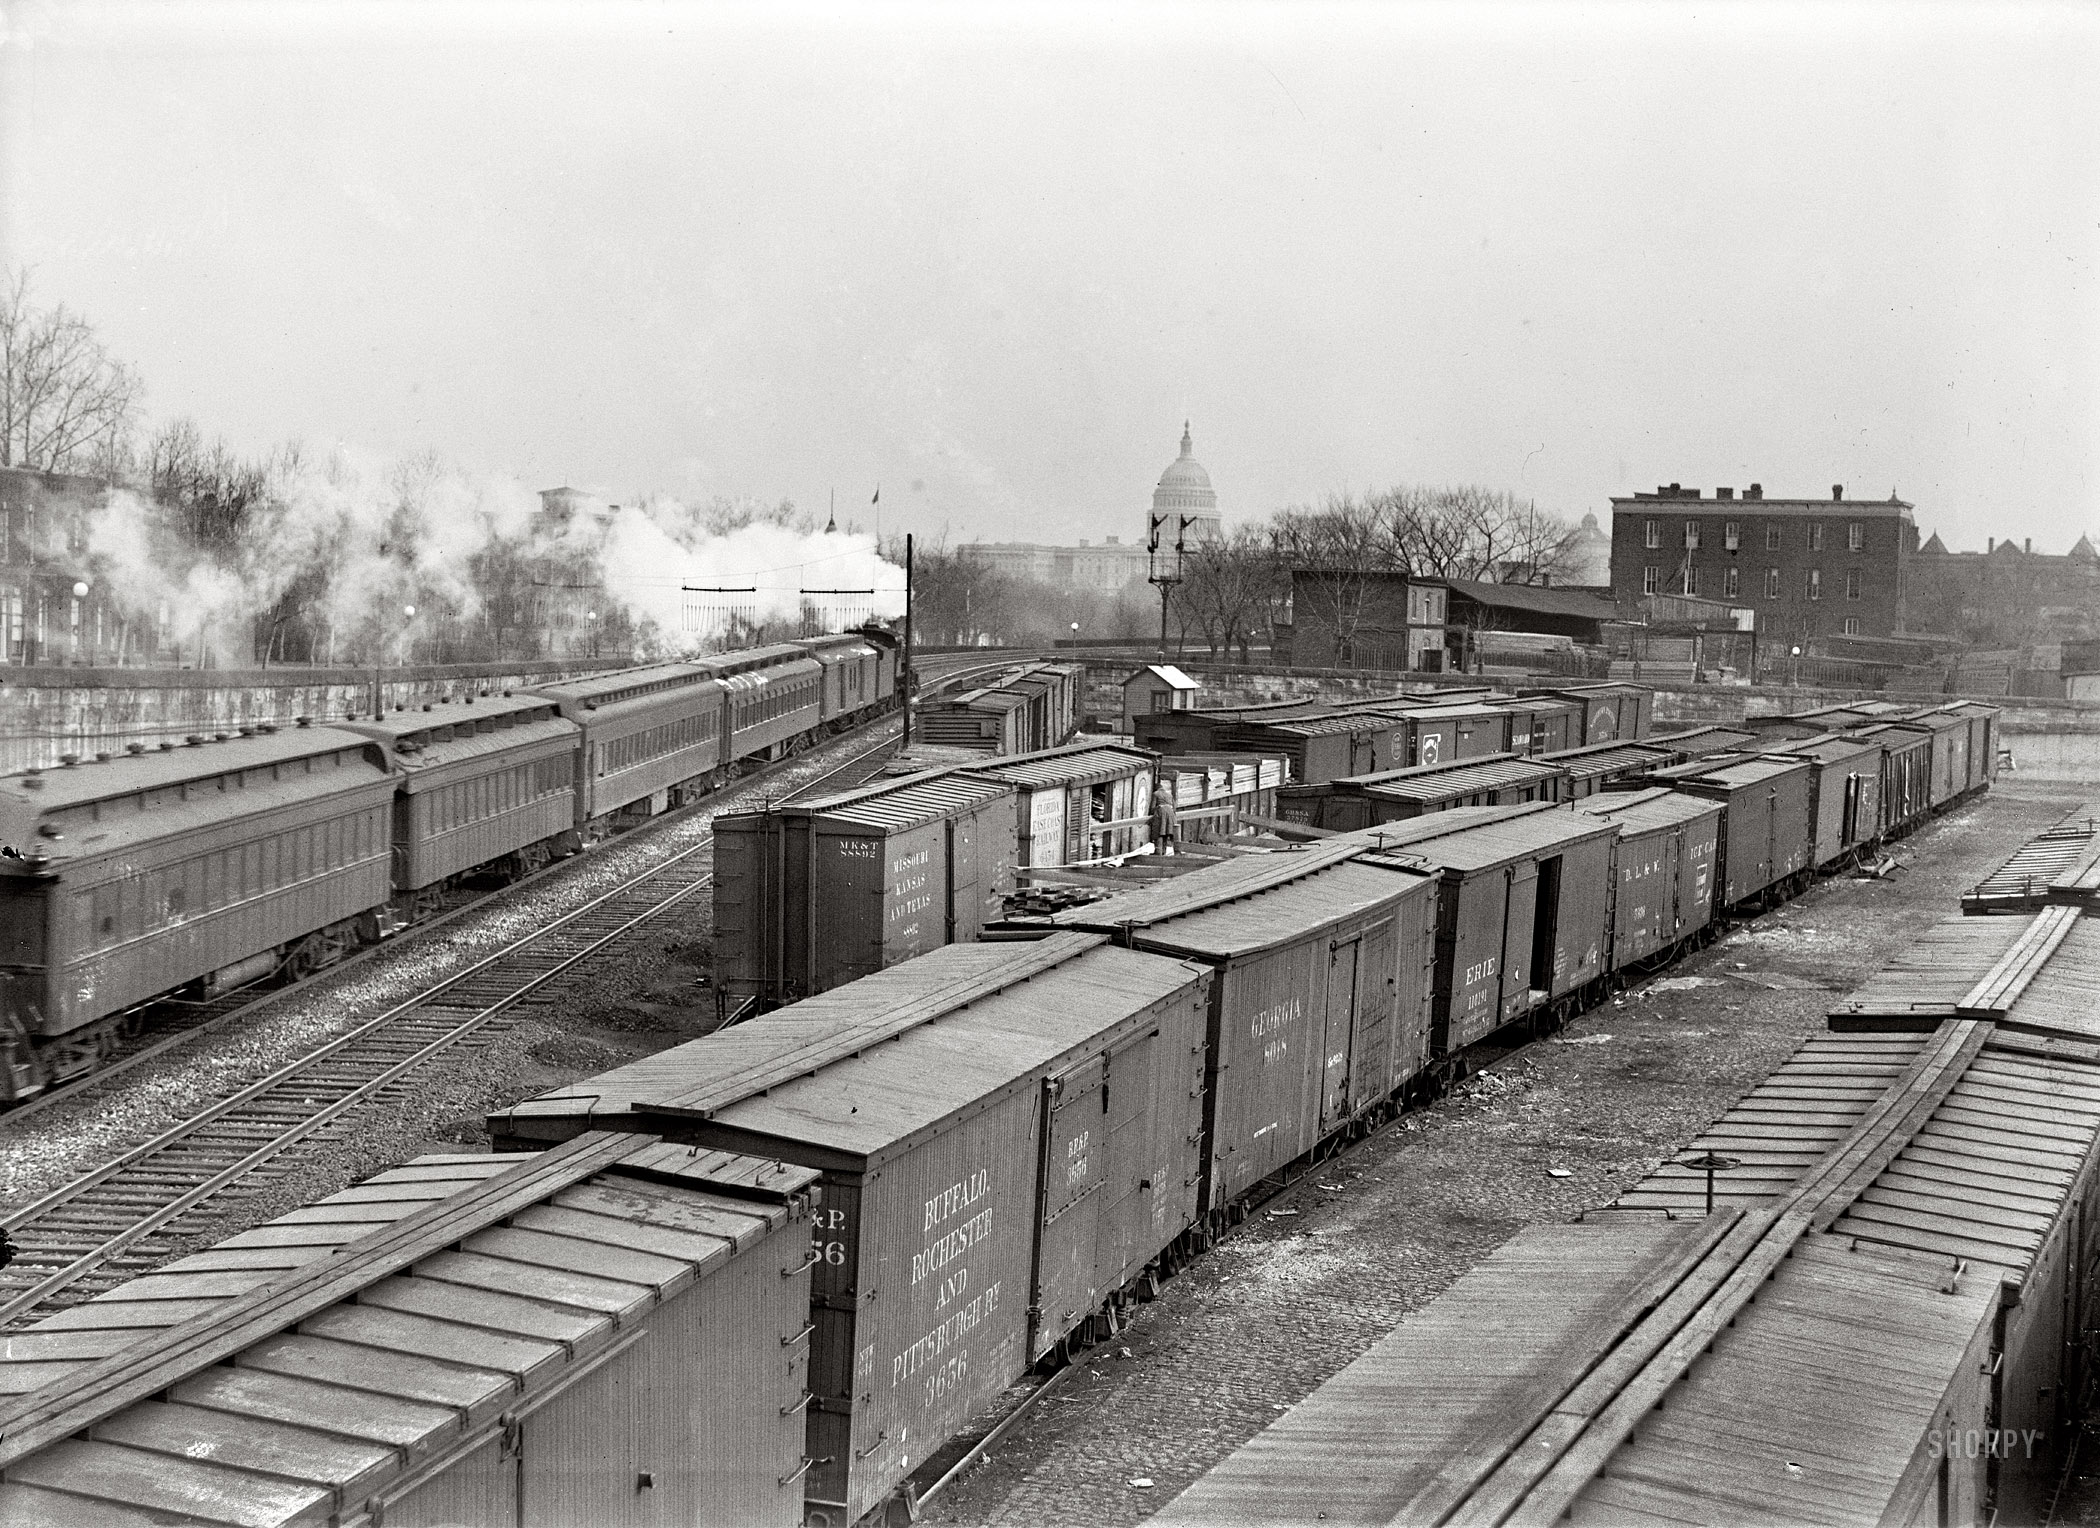 Washington, D.C., circa 1917. "U.S. Capitol dome from rail yards in Southeast section." Harris & Ewing Collection glass negative. View full size.